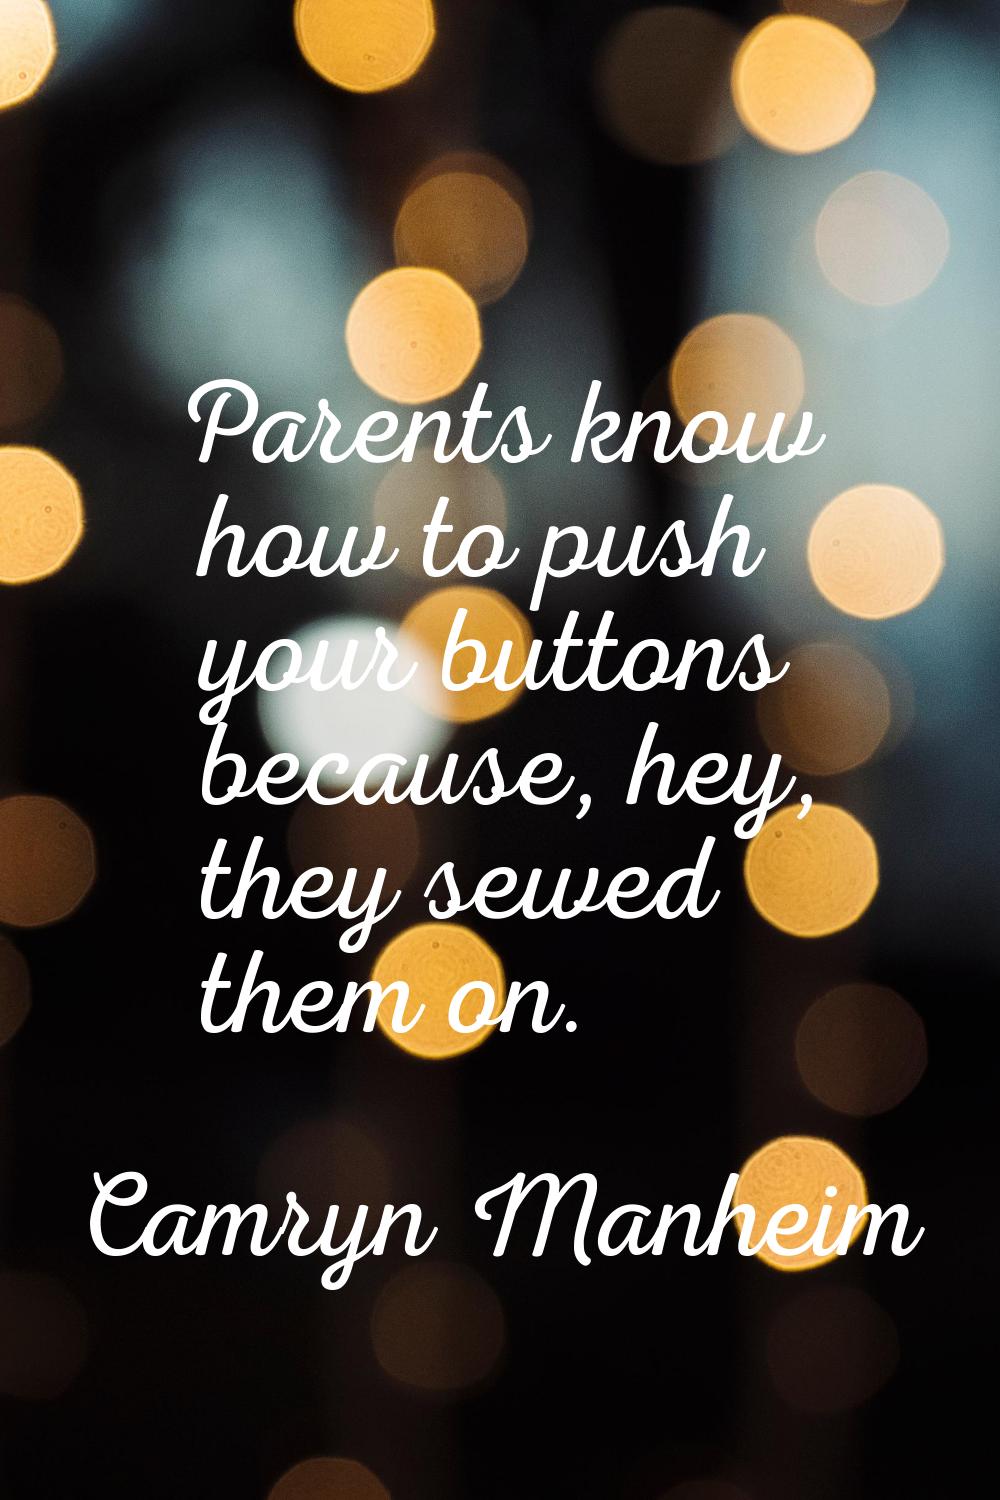 Parents know how to push your buttons because, hey, they sewed them on.